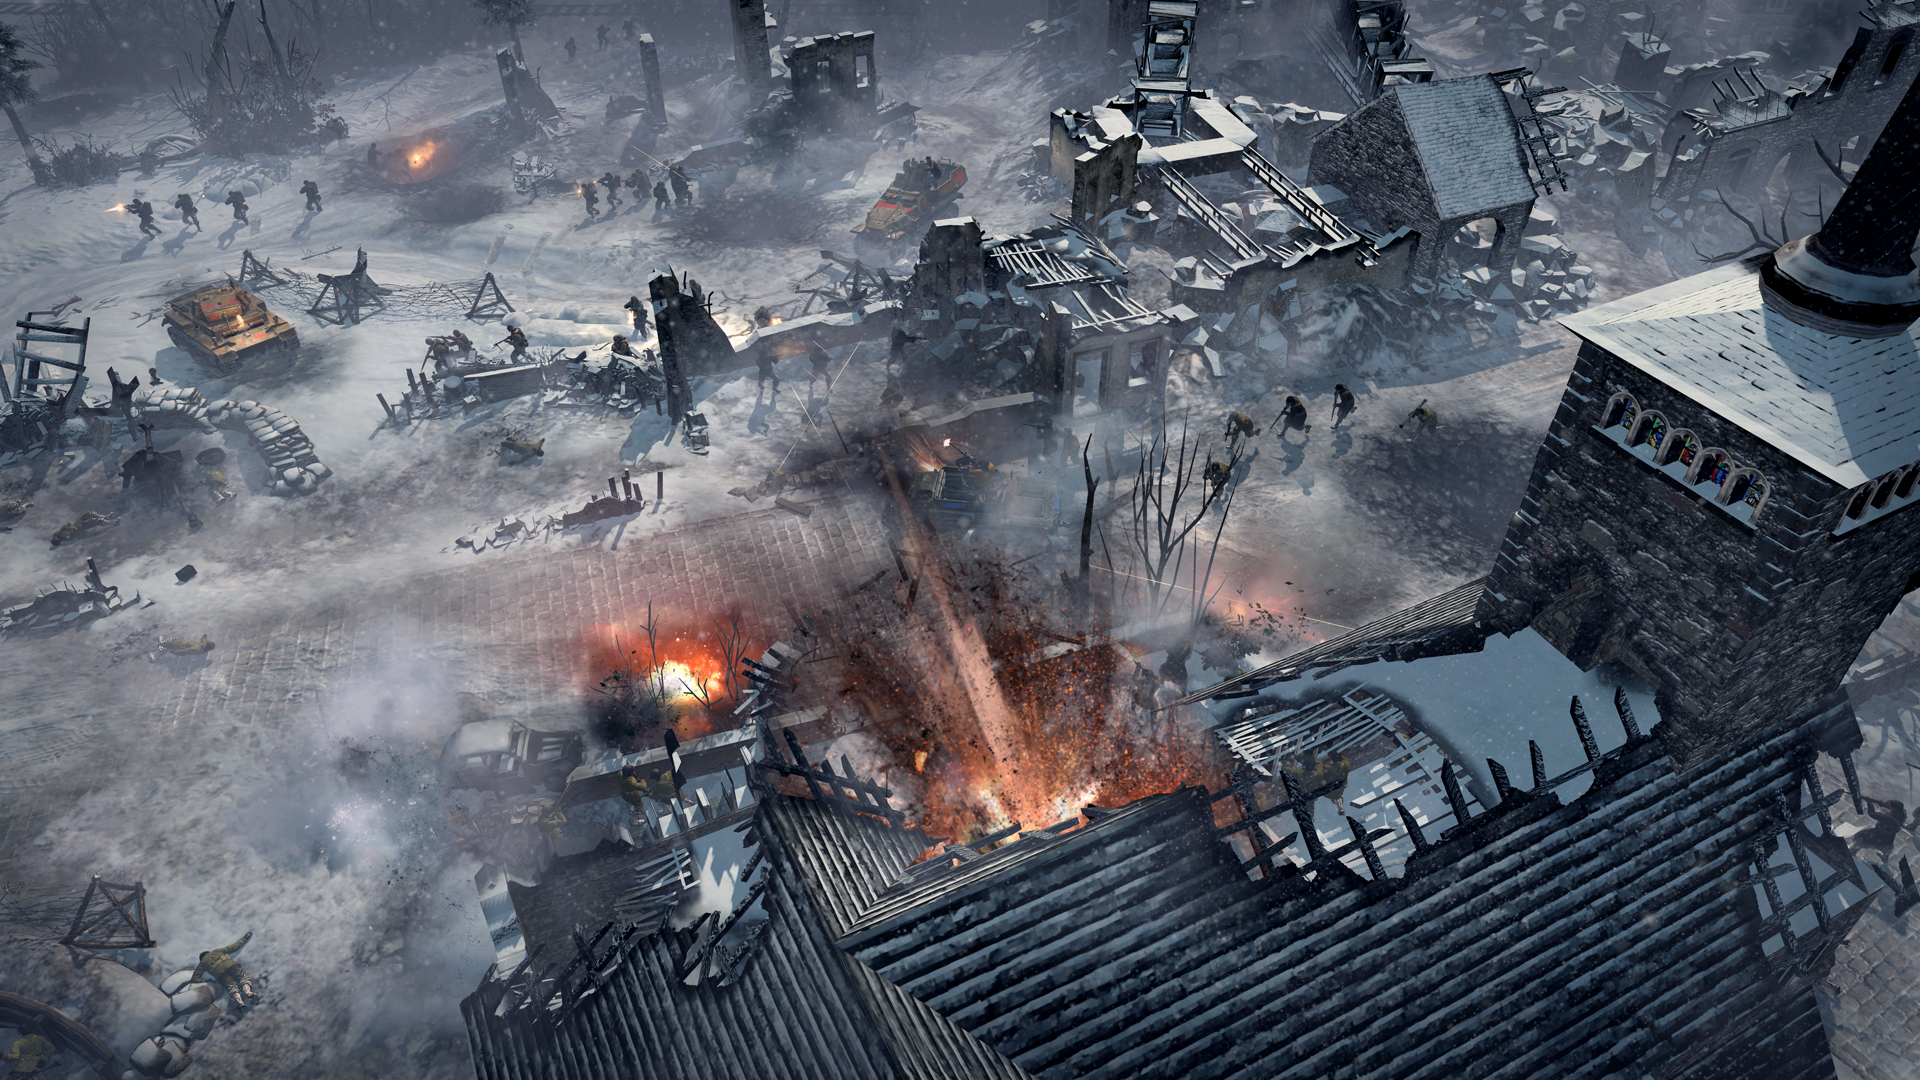 Best war games: Company of Heroes 2: Ardennes Assault. Image shows soldiers in a cold barren landscape seen from above.